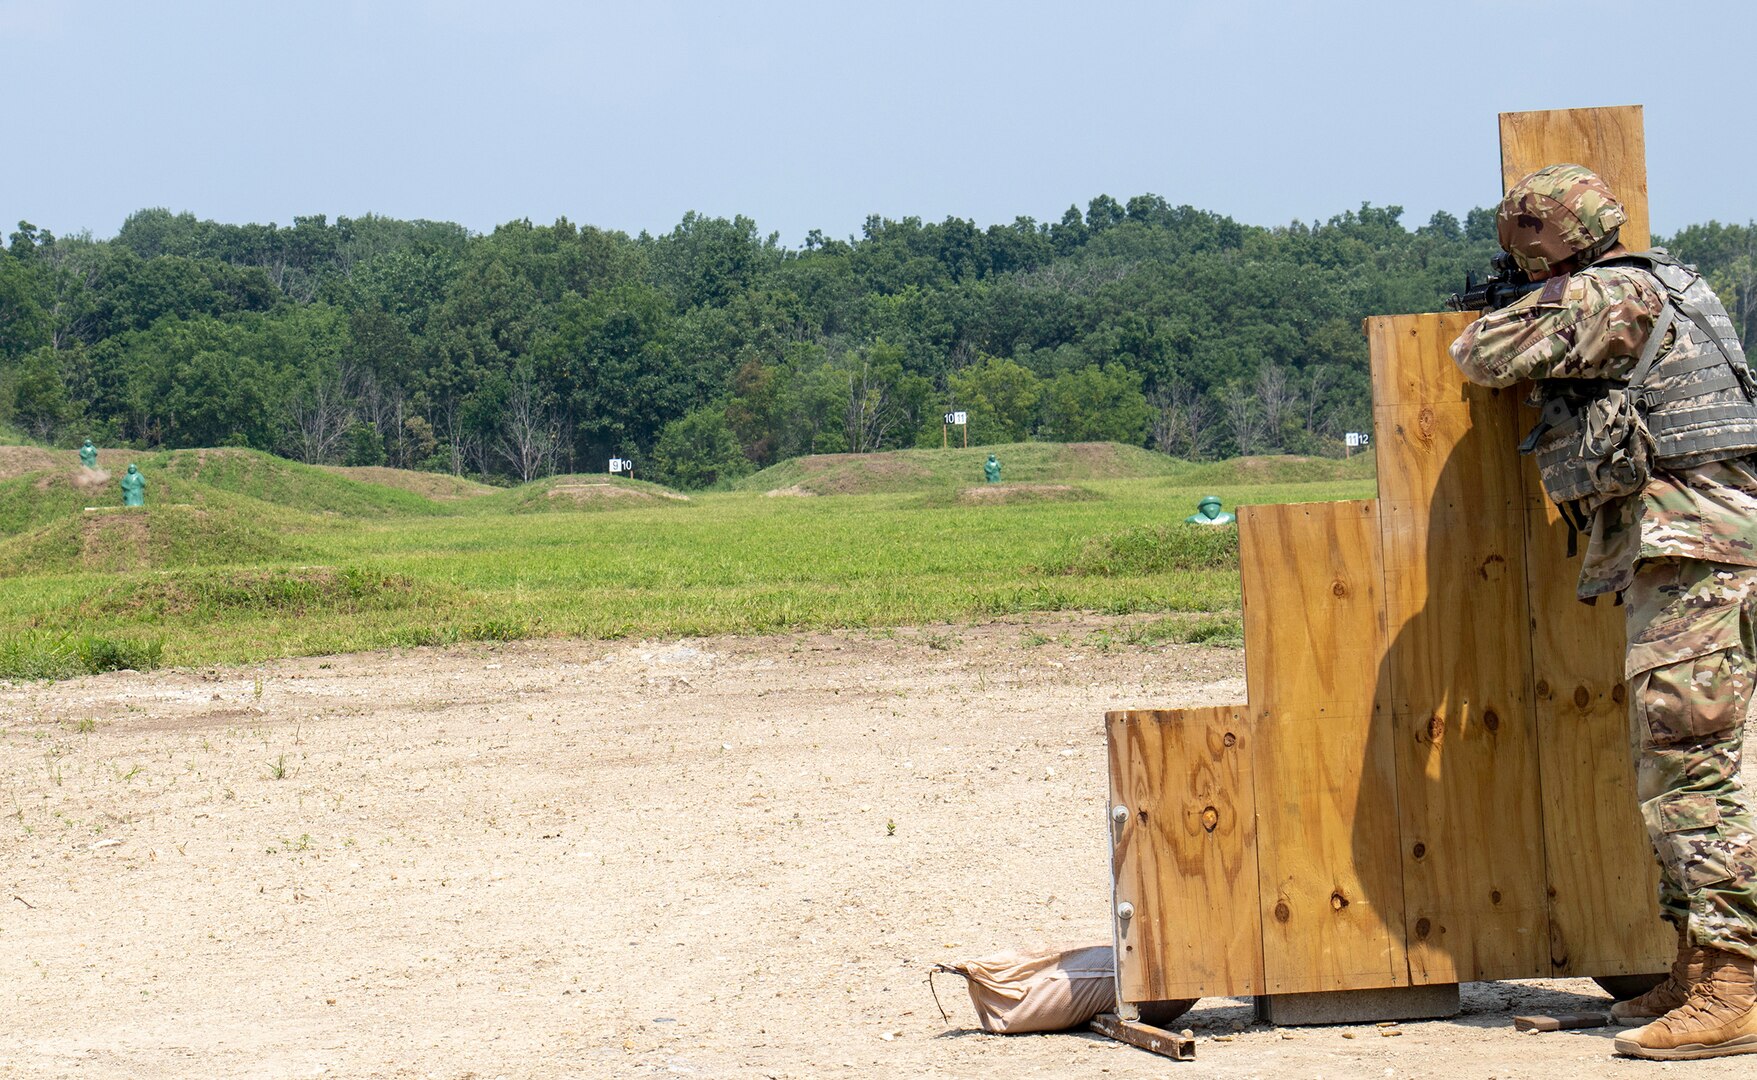 A Soldier in the Illinois Army National Guard demonstrates the Automated Record Fire Range at the Marseilles Training Center in Marseilles, Illinois, during a dedication event and capabilities demonstration, July 23. The $4.6 million federally-funded project updated the target systems and expanded the ARF by 10 firing positions.